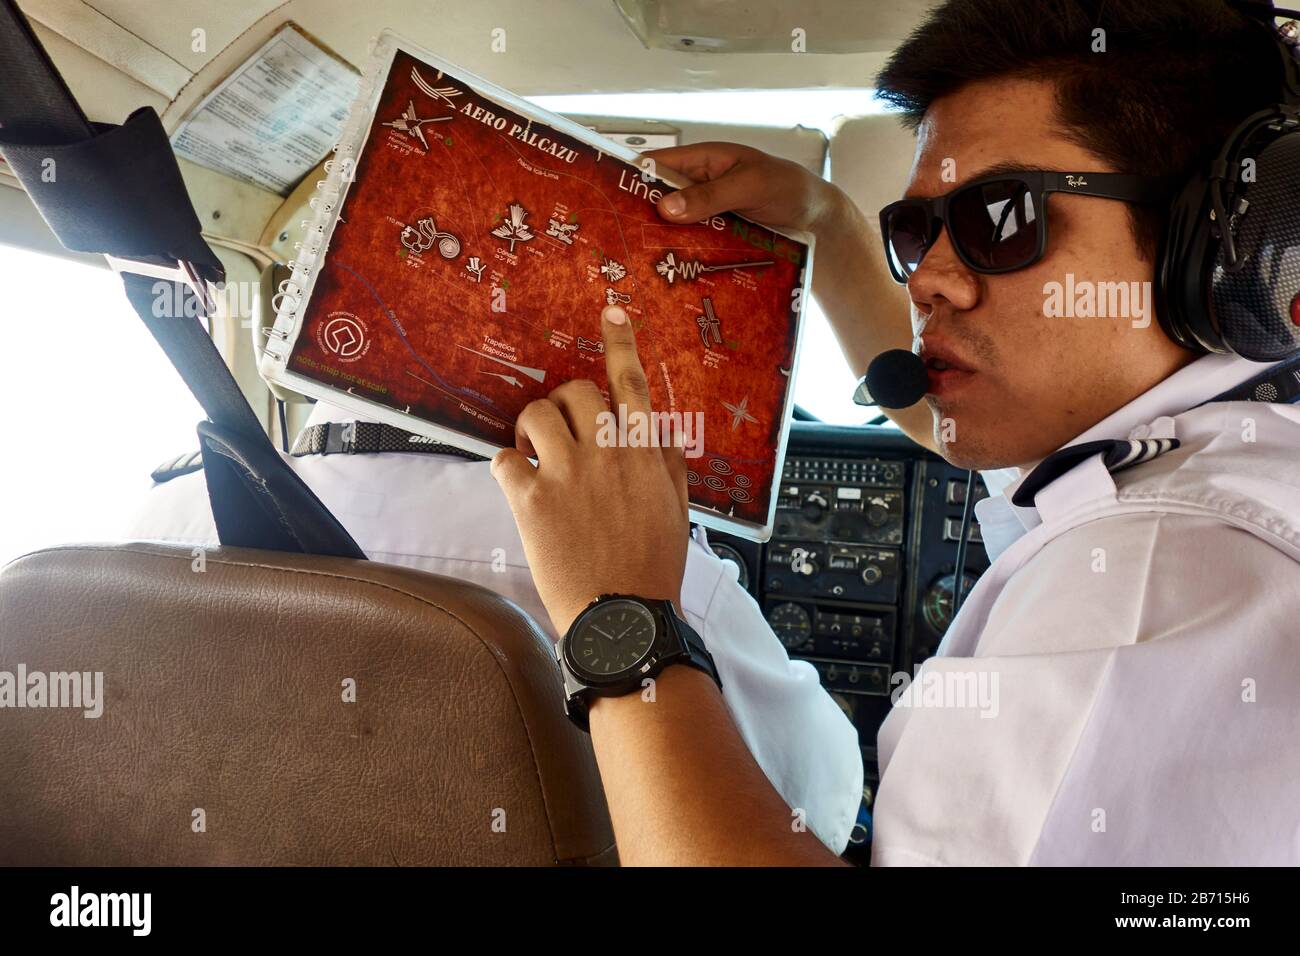 Co-pilot showing Nazca lines illustration to passengers in small plane. Stock Photo